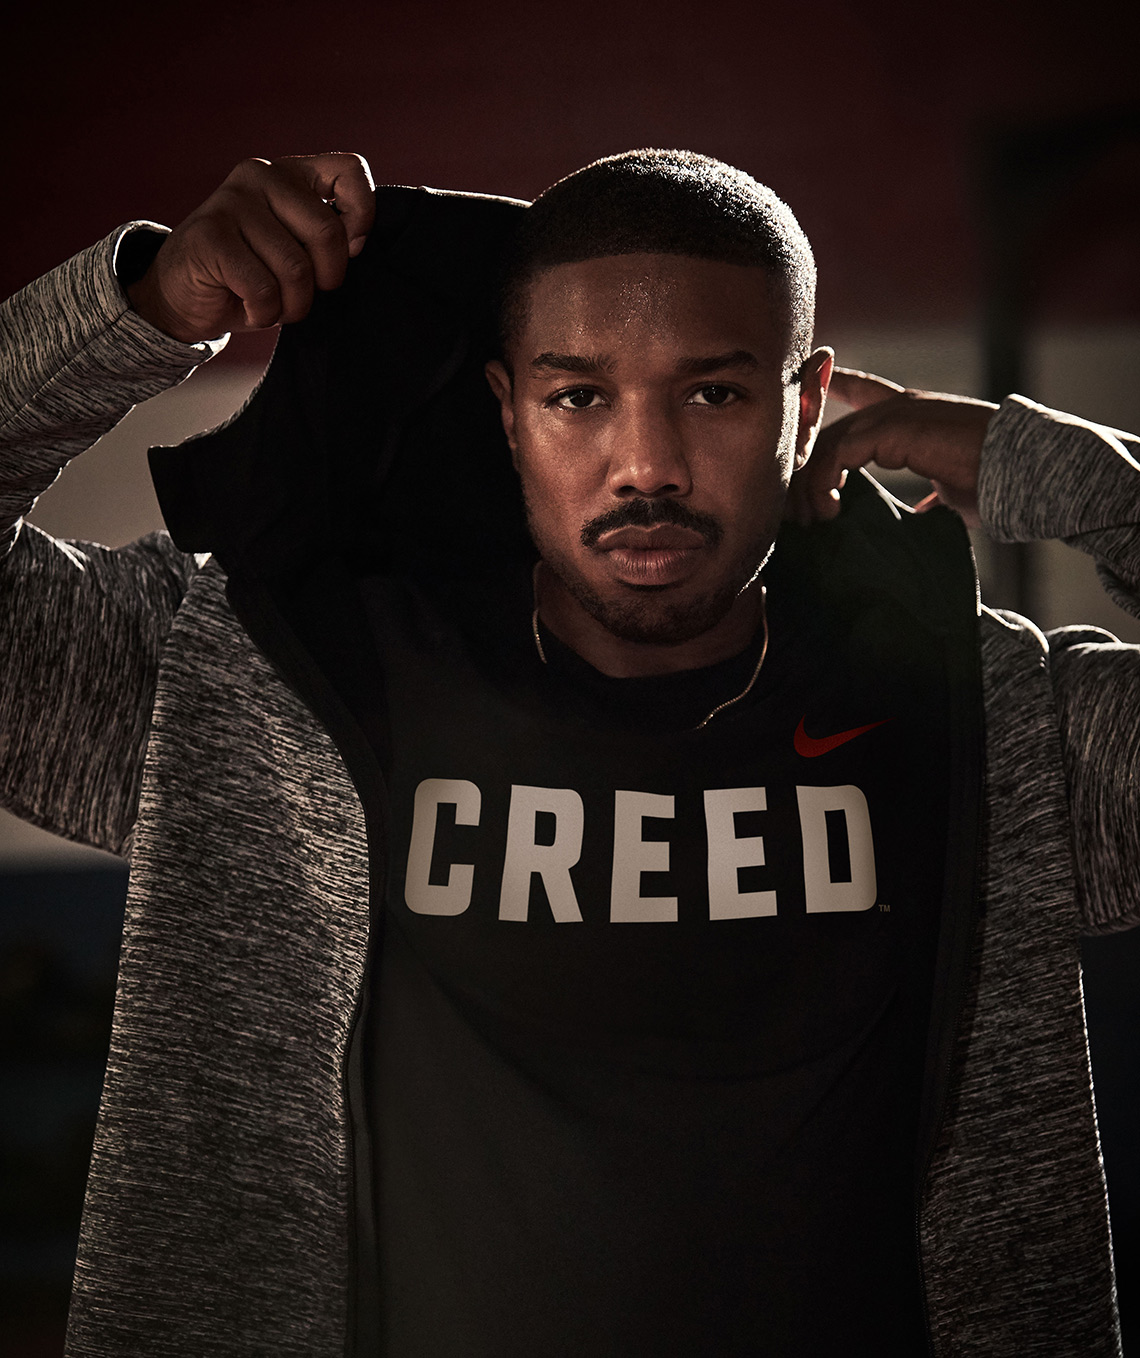 creed metcon